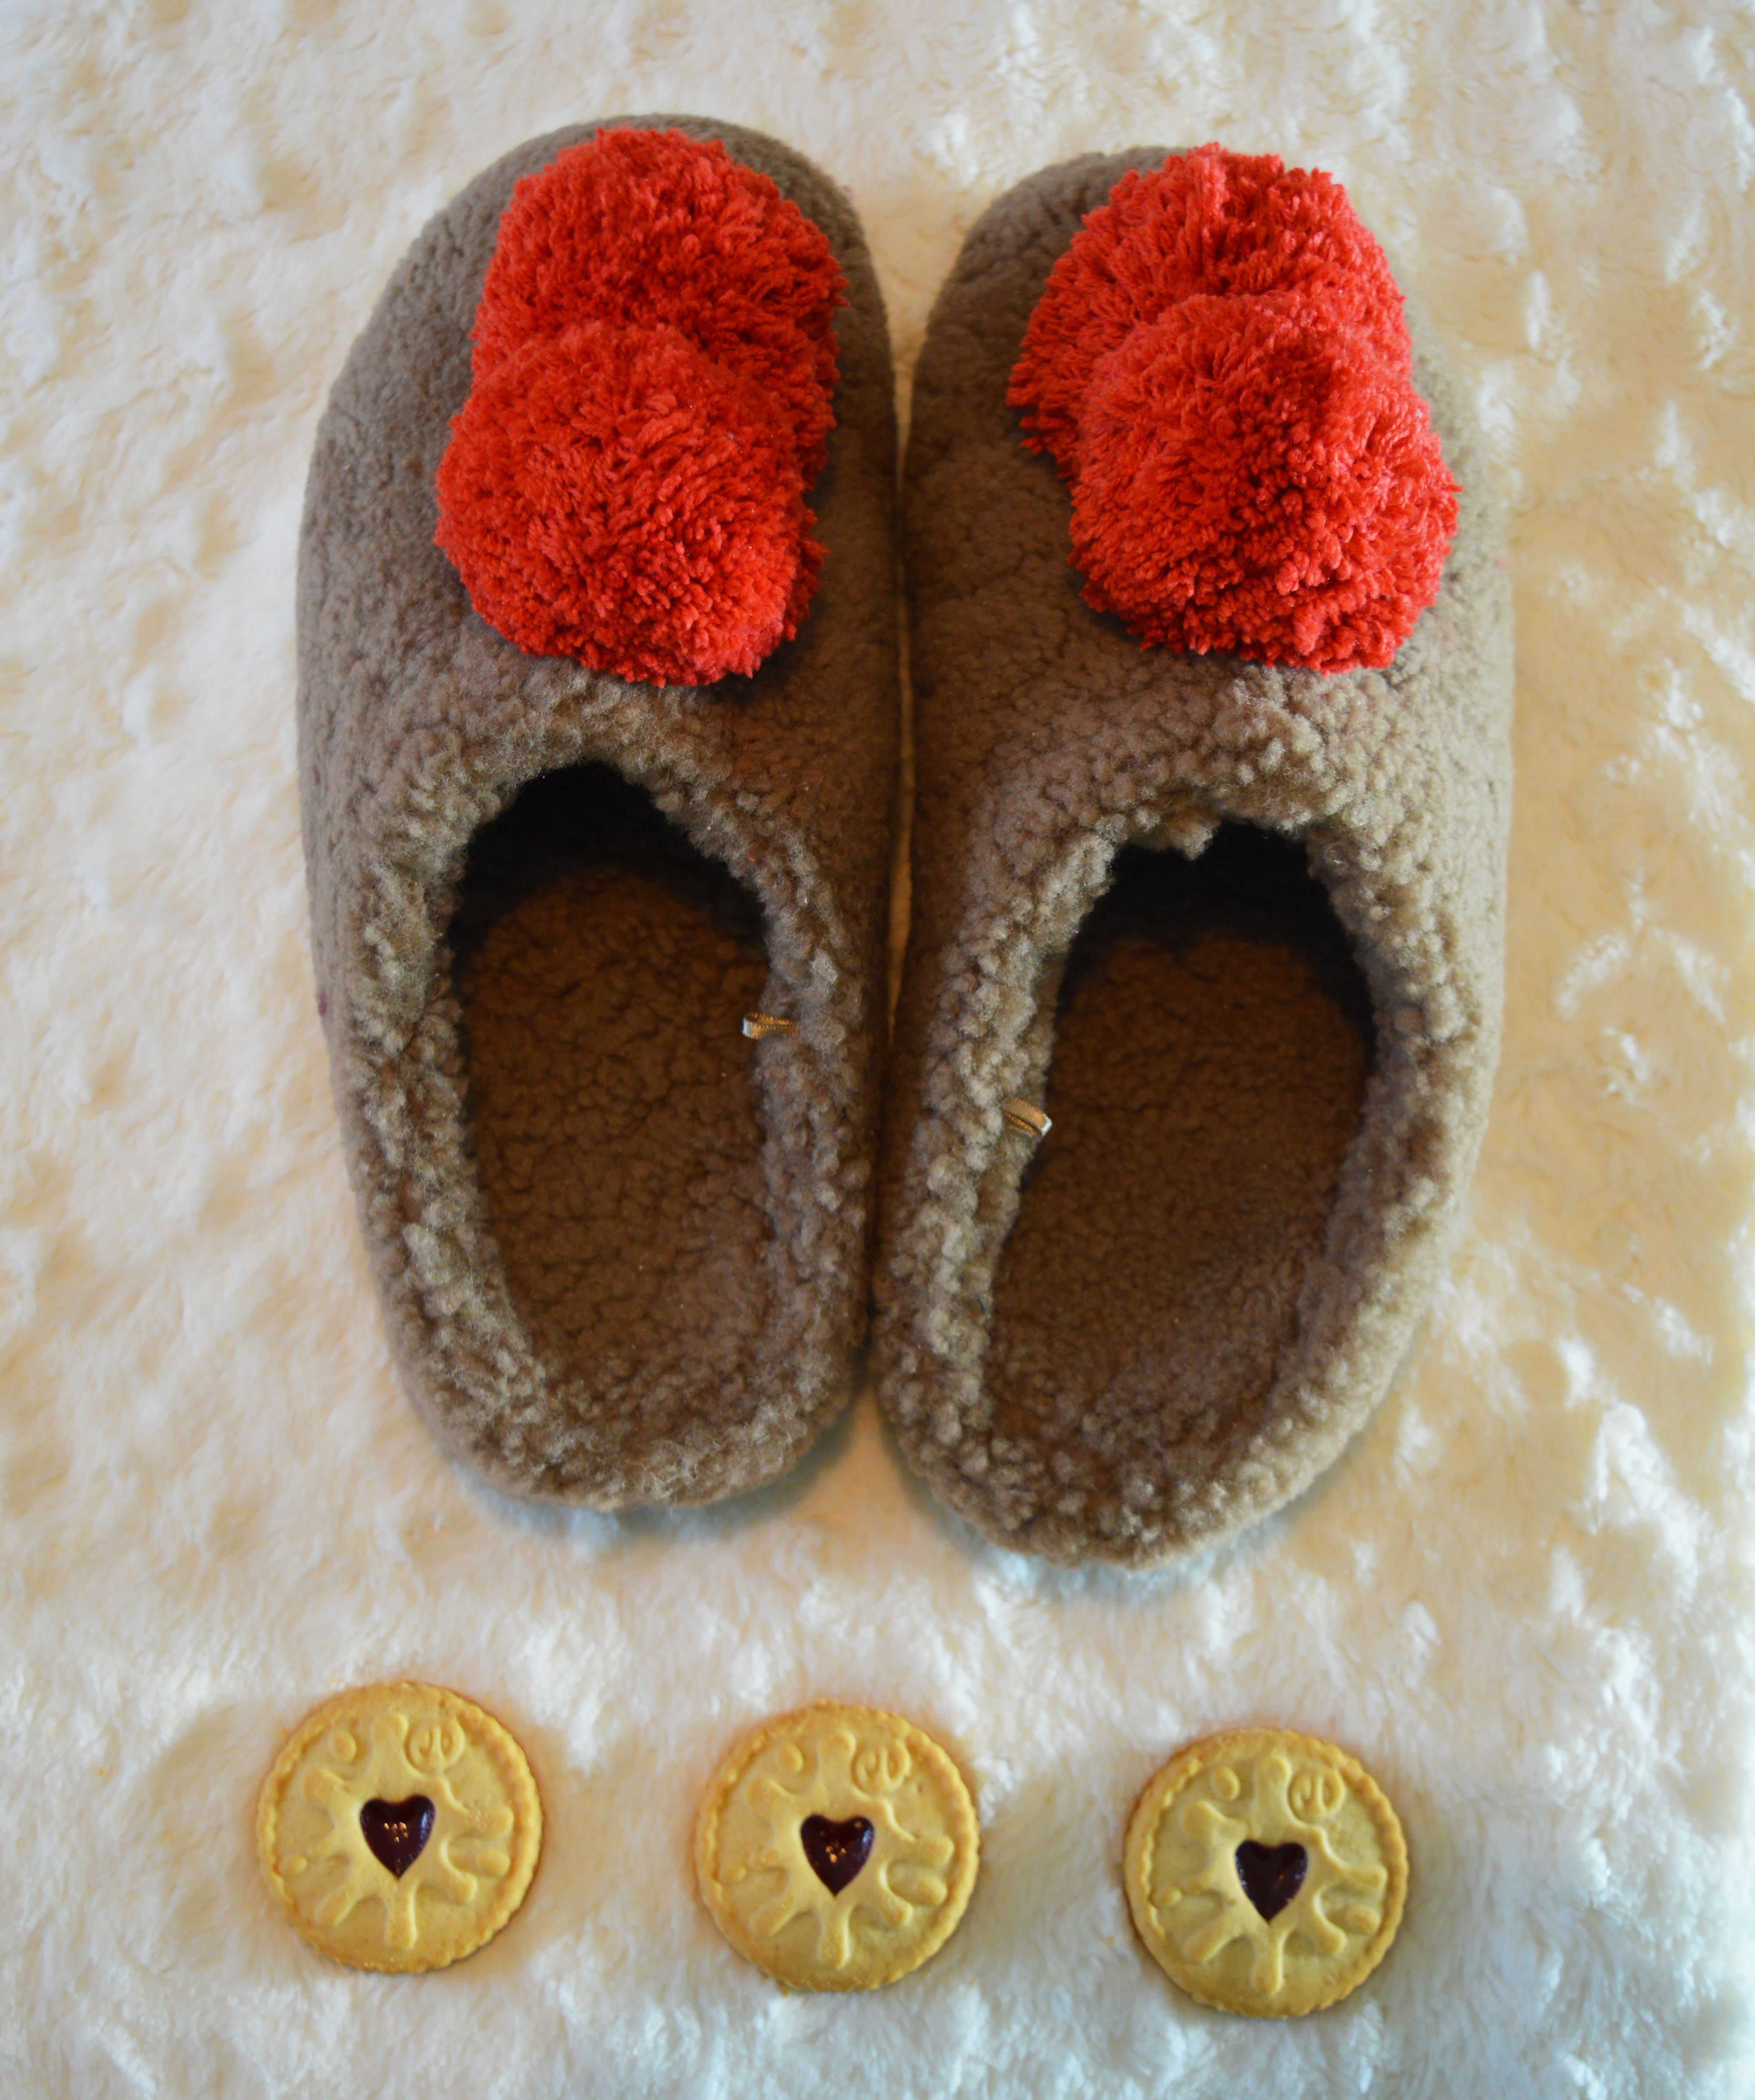 Charity Slippers From FitFlop 